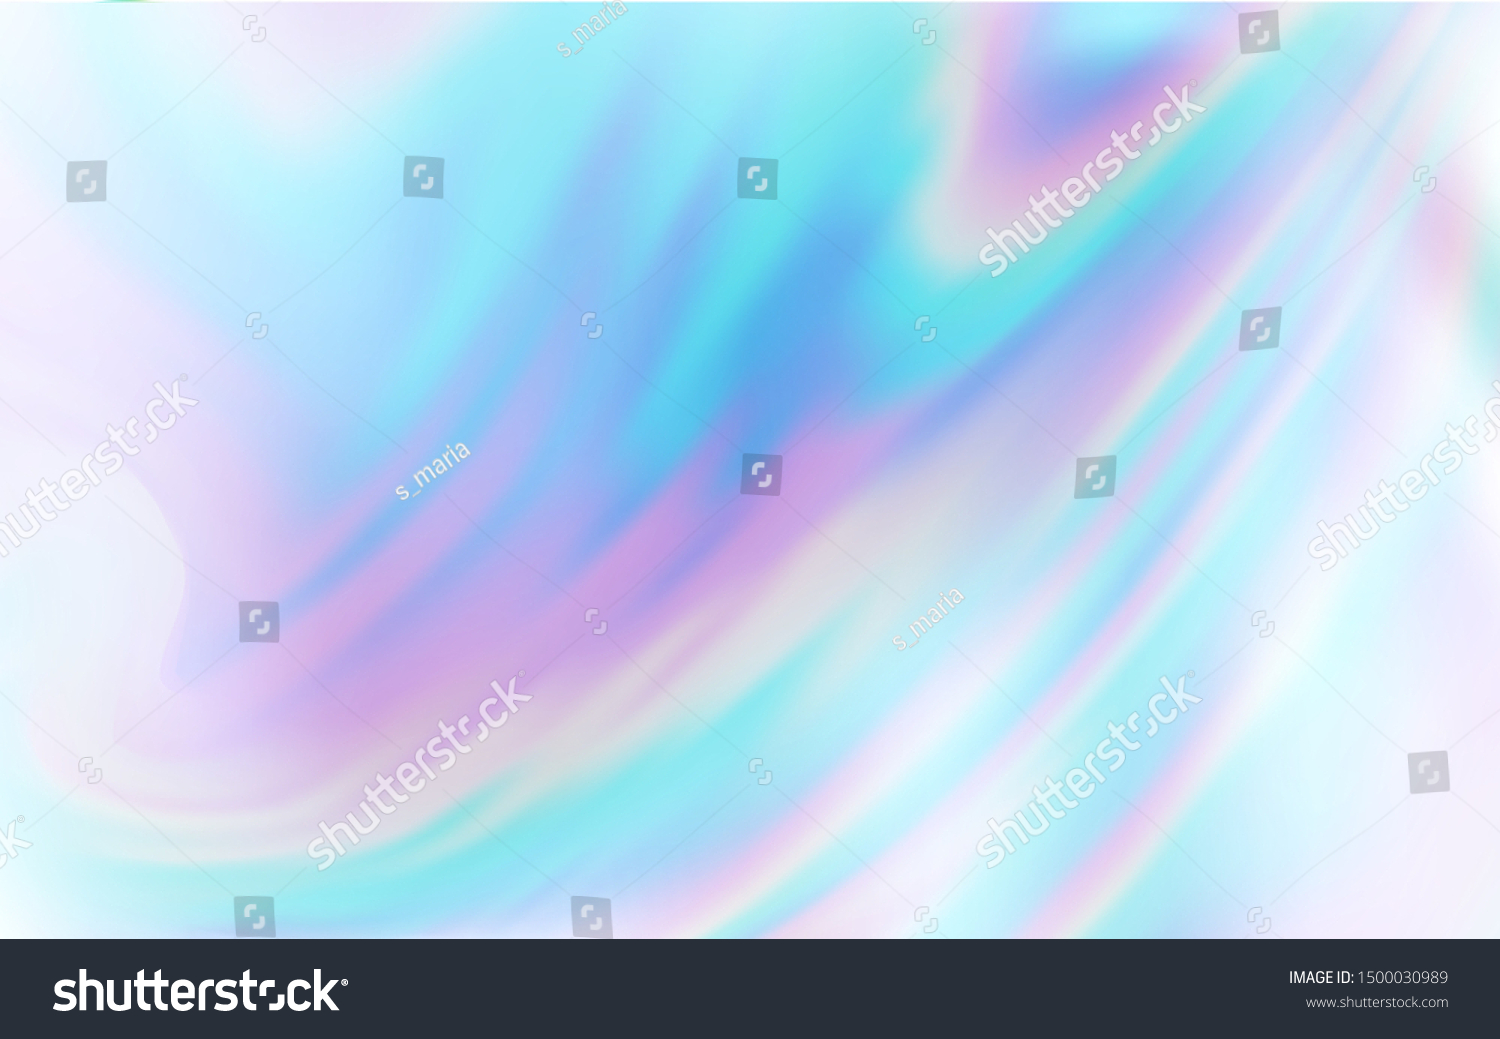 stock-vector-light-blue-vector-blurred-pattern-colorful-abstract-illustration-with-gradient-background-for-a-1500030989